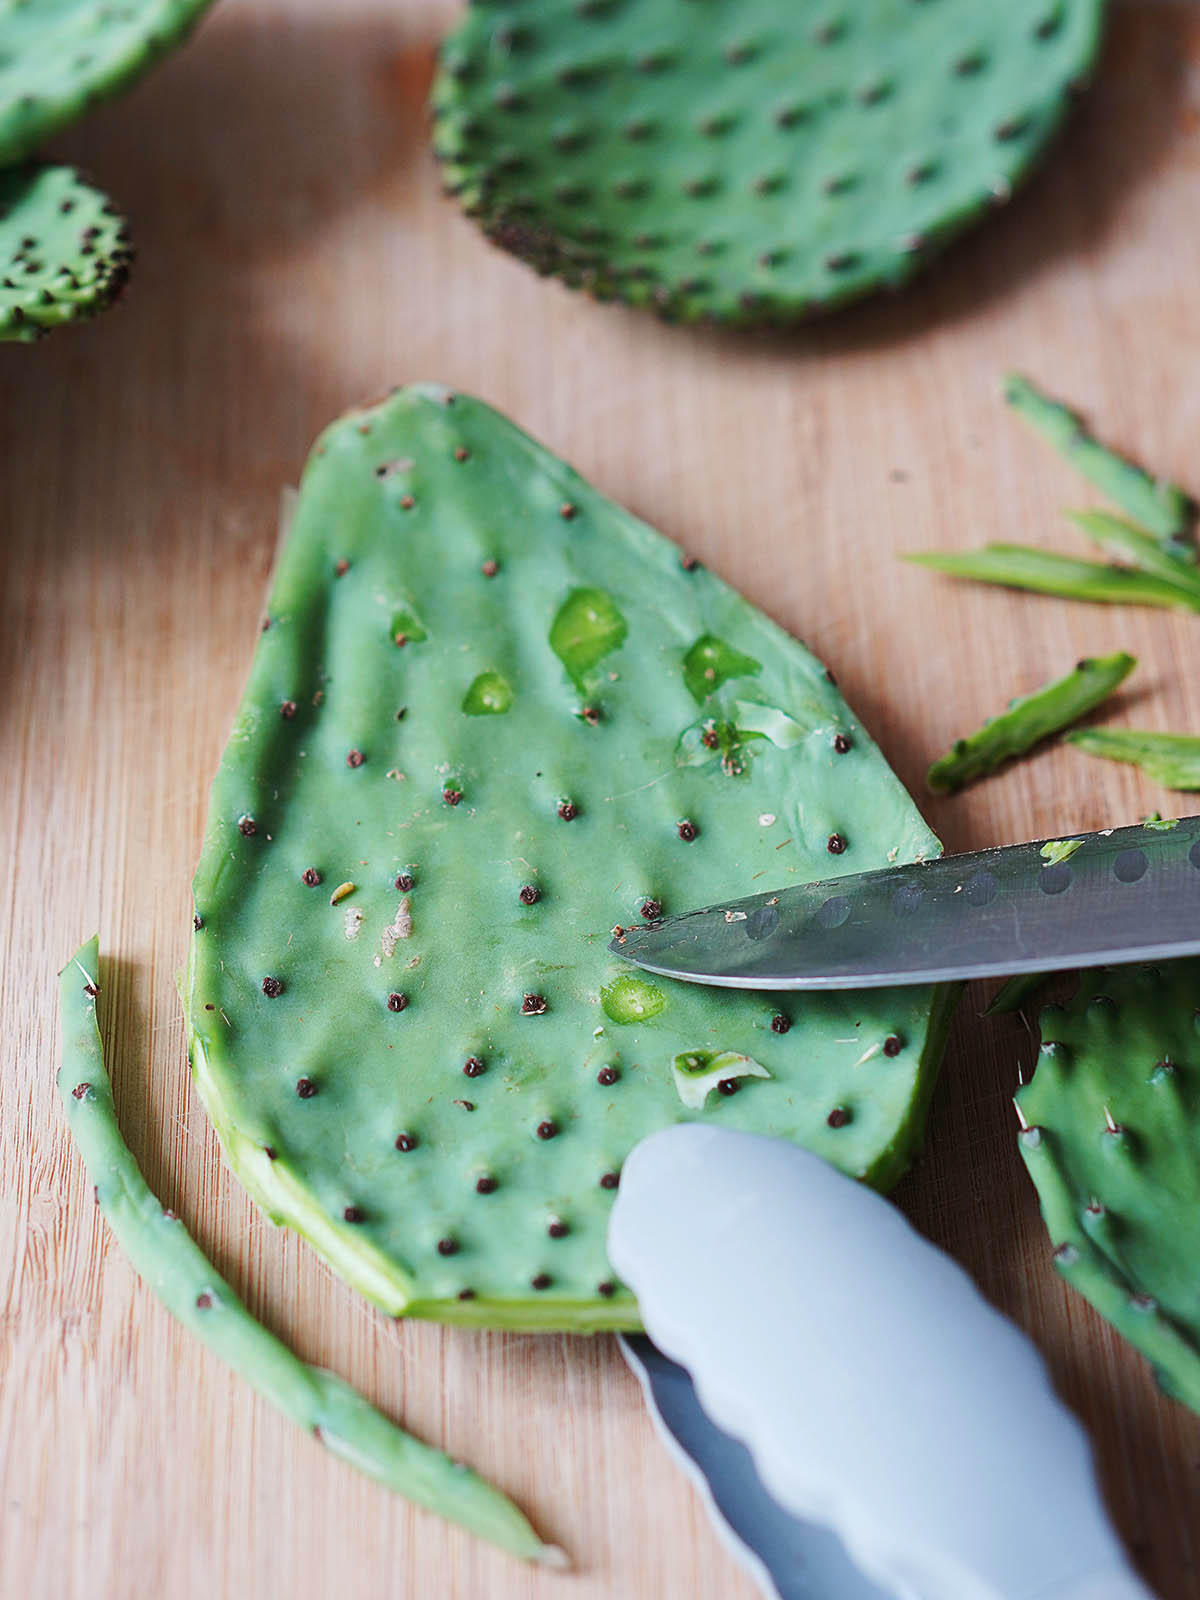 A knife scraping off its thorns of a cactus paddle.